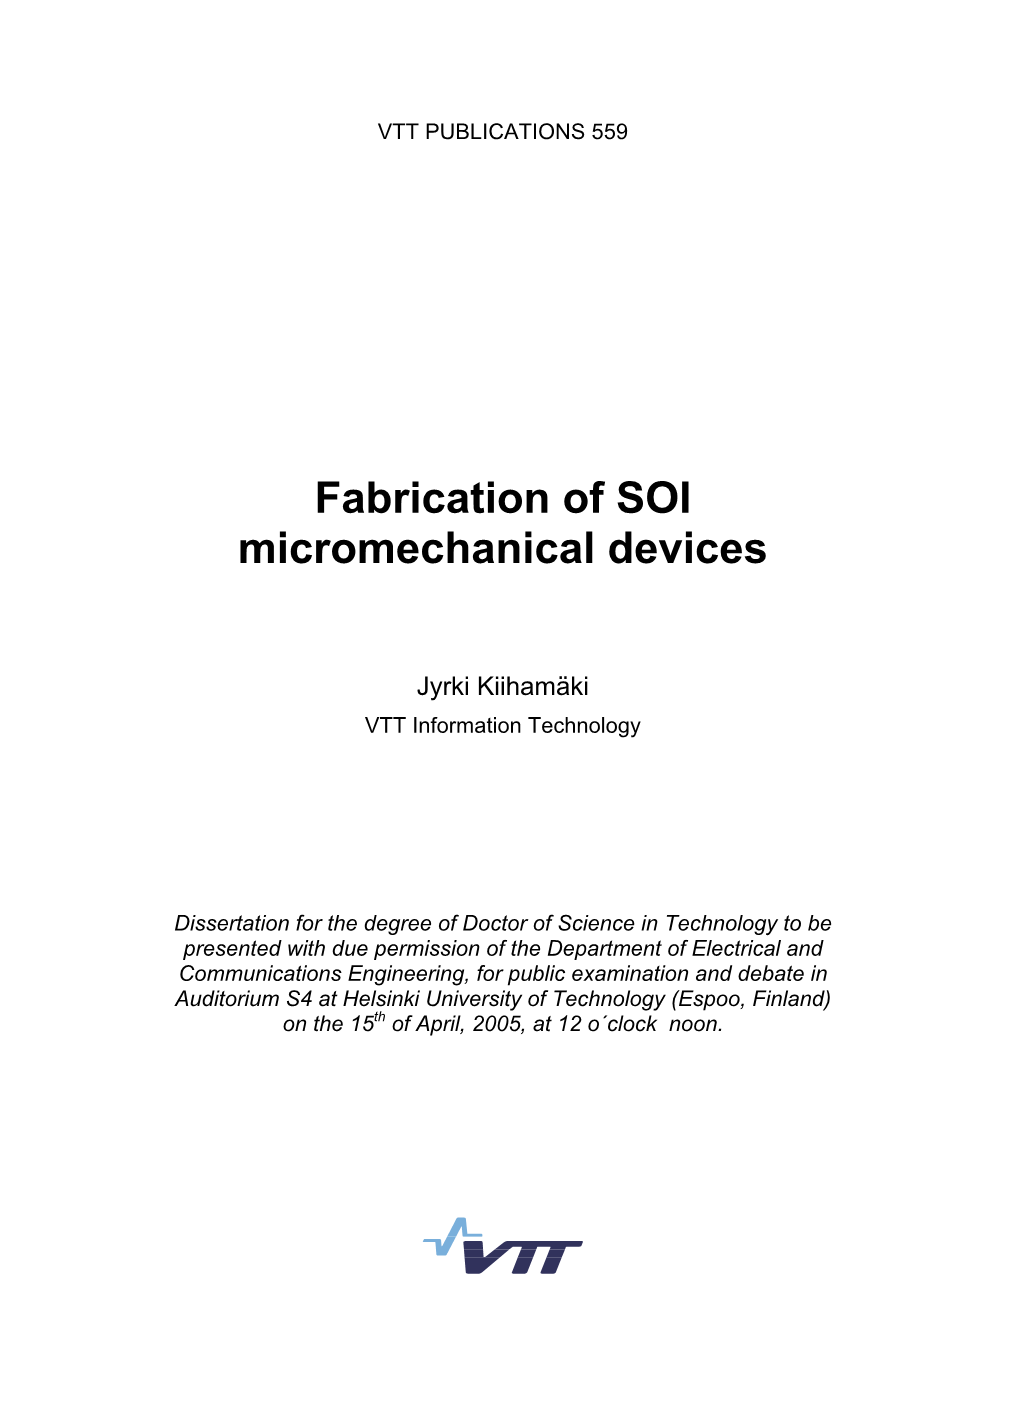 Fabrication of SOI Micromechanical Devices